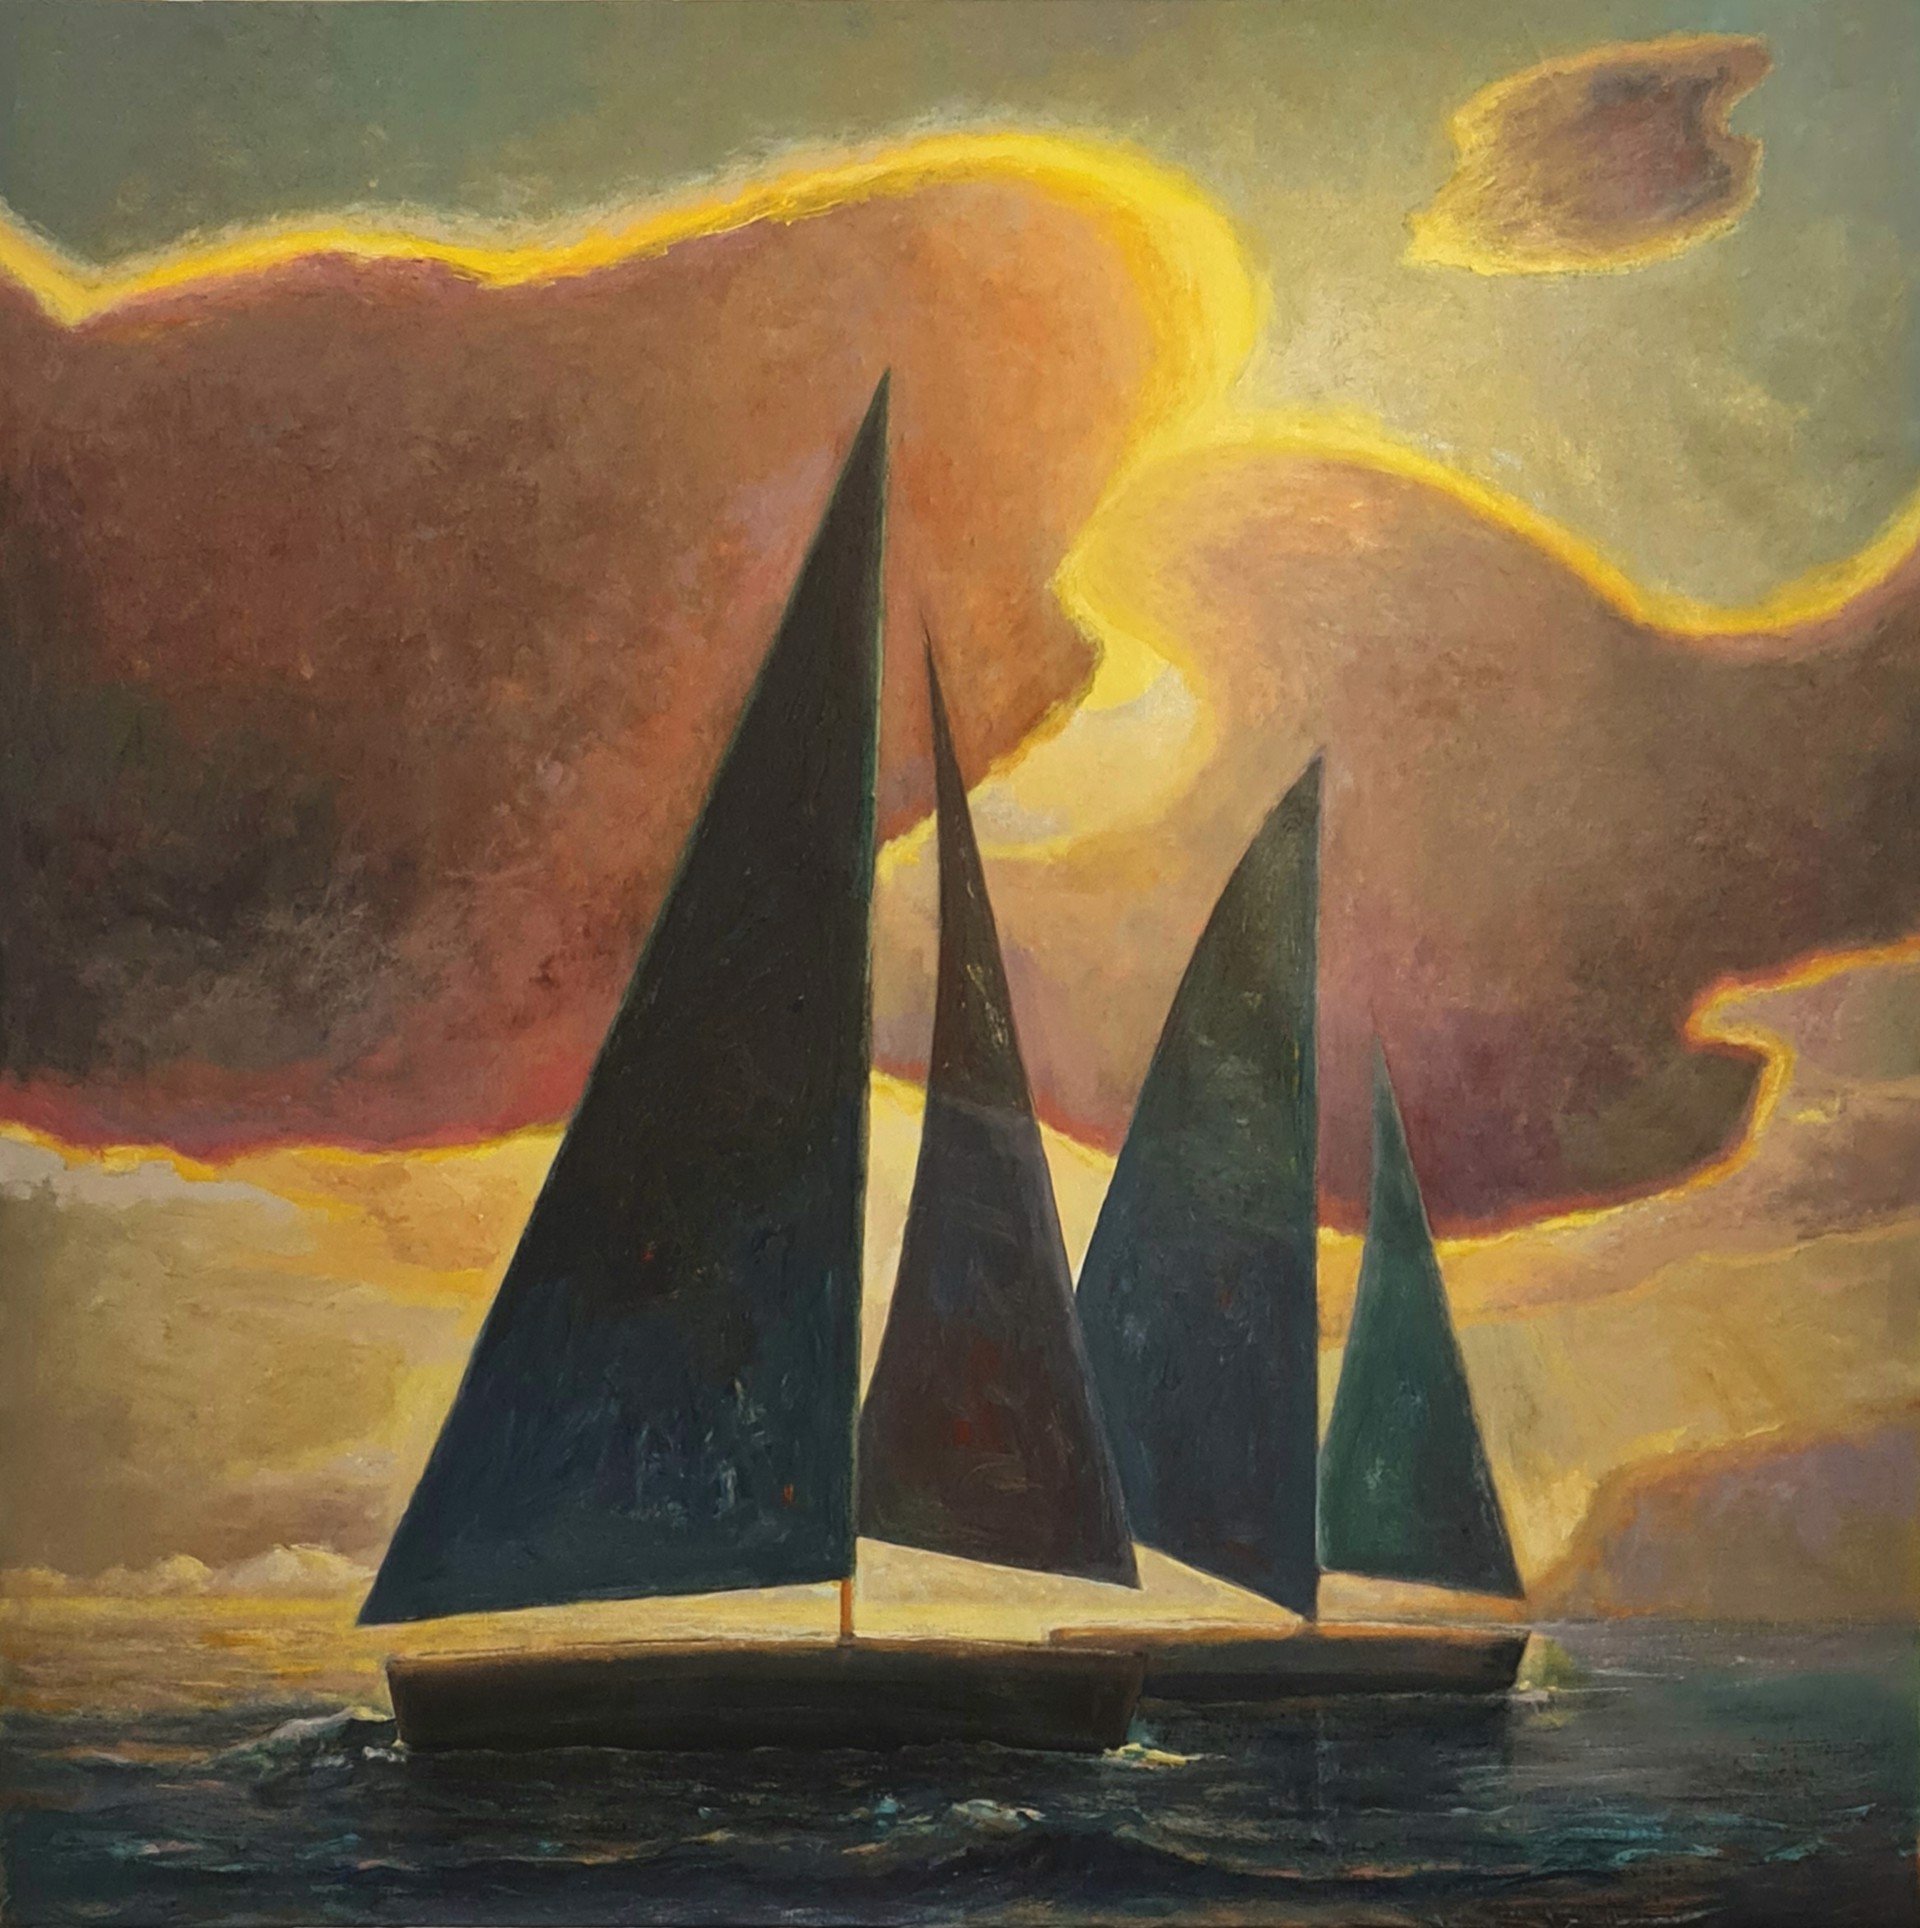 Sunset Sails by Tony Coles